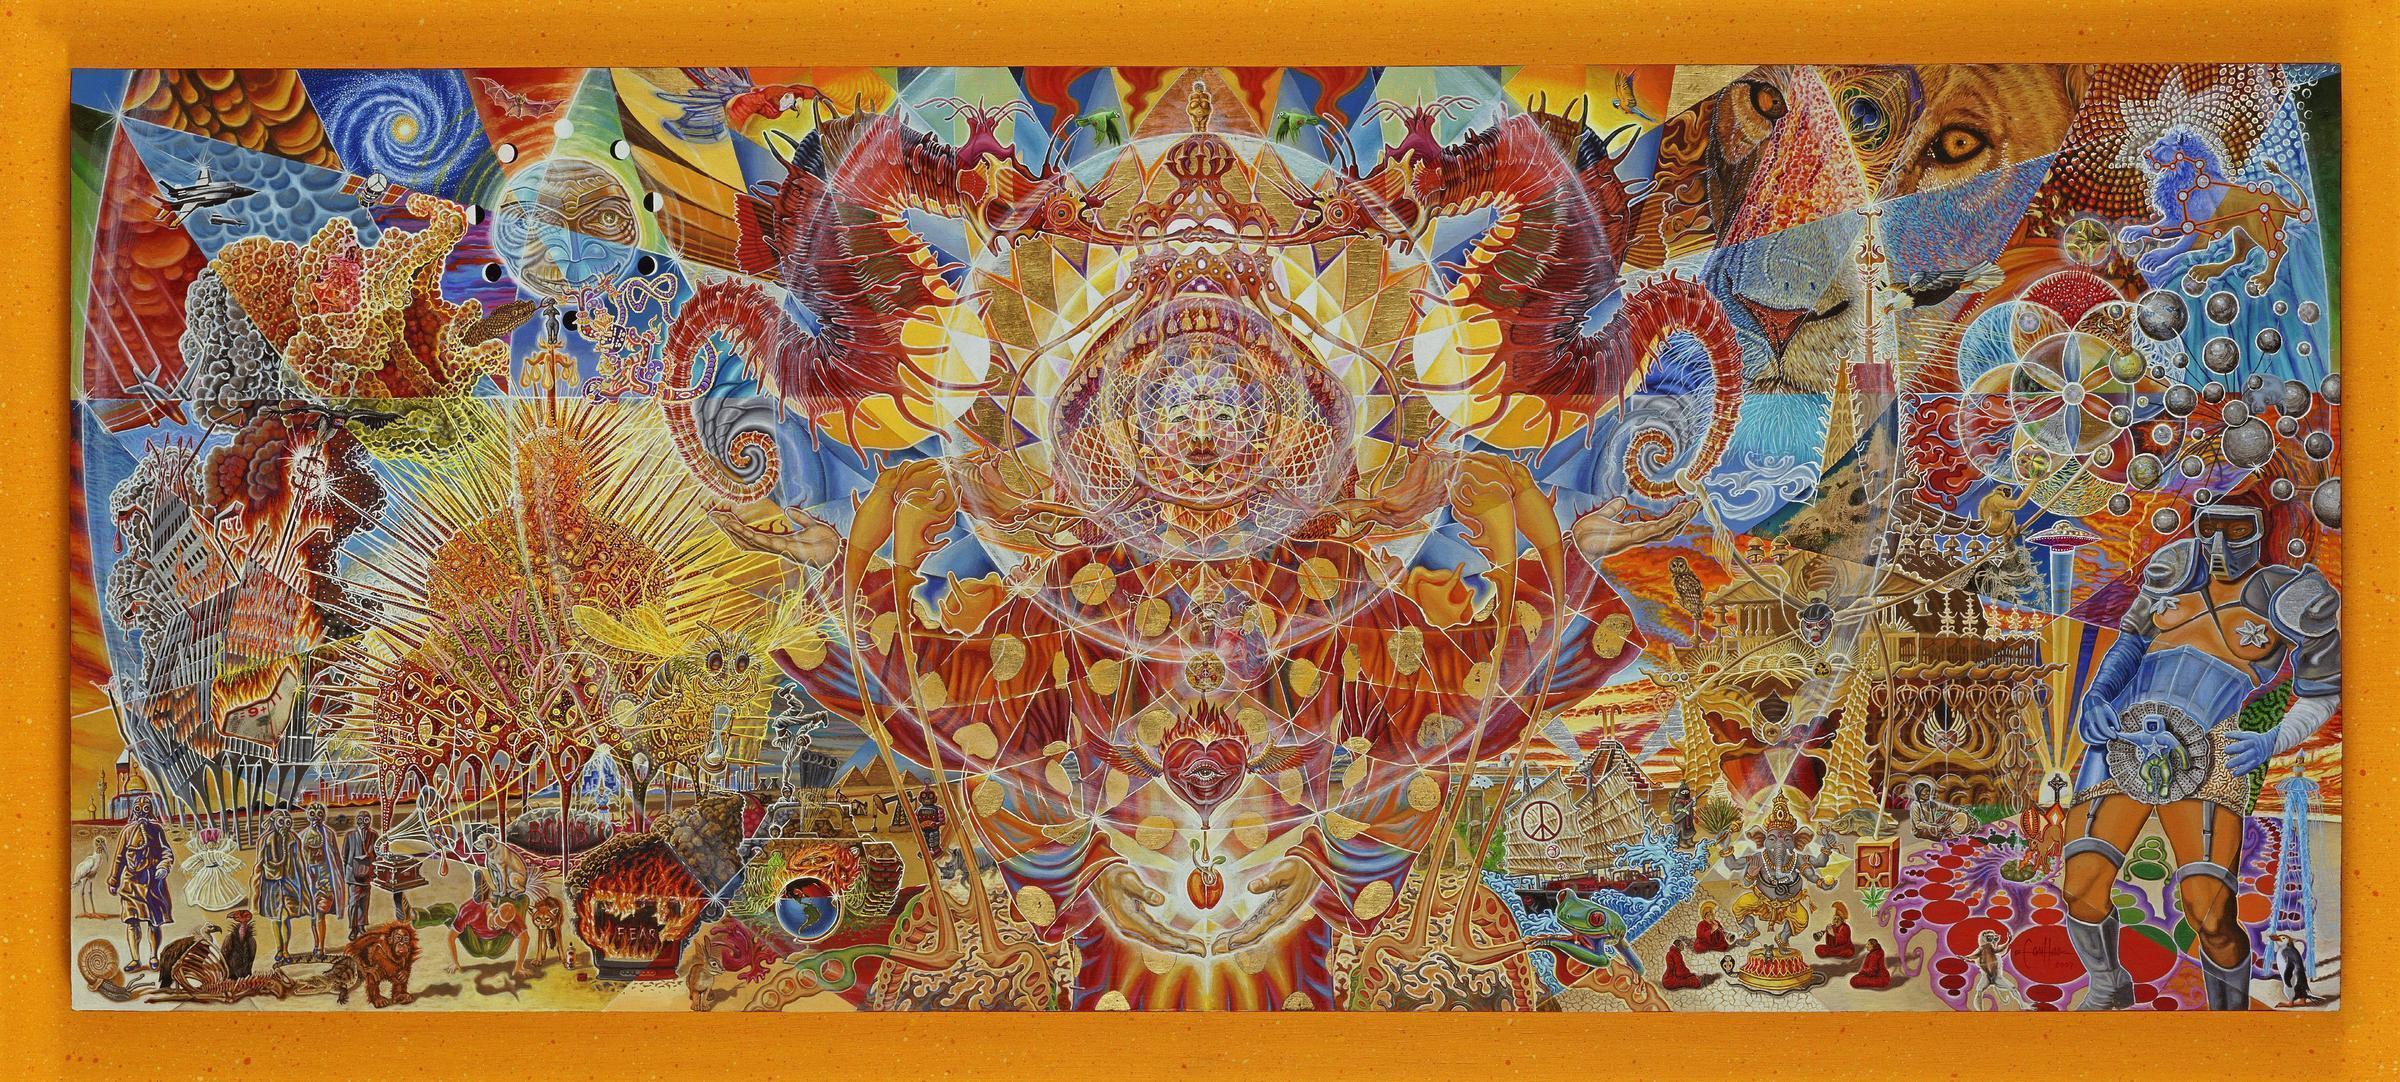 Found this searching DMT Art [pic]